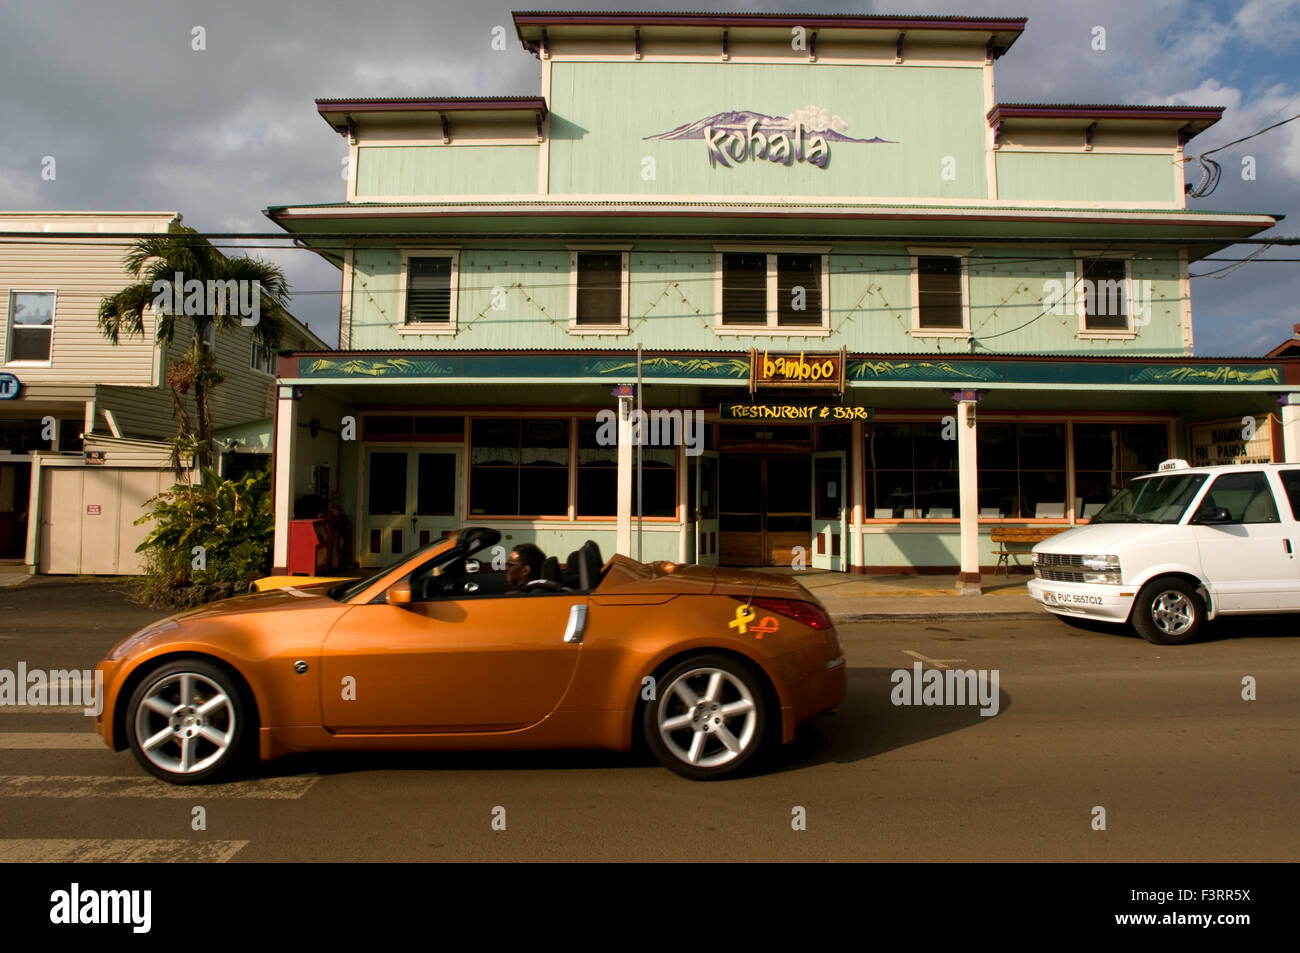 Kohala Bamboo Restaurant and Bar in Hawi. Nisan 370Z. Hawi is the most northern town. Wooden houses painted in bold colors trans Stock Photo